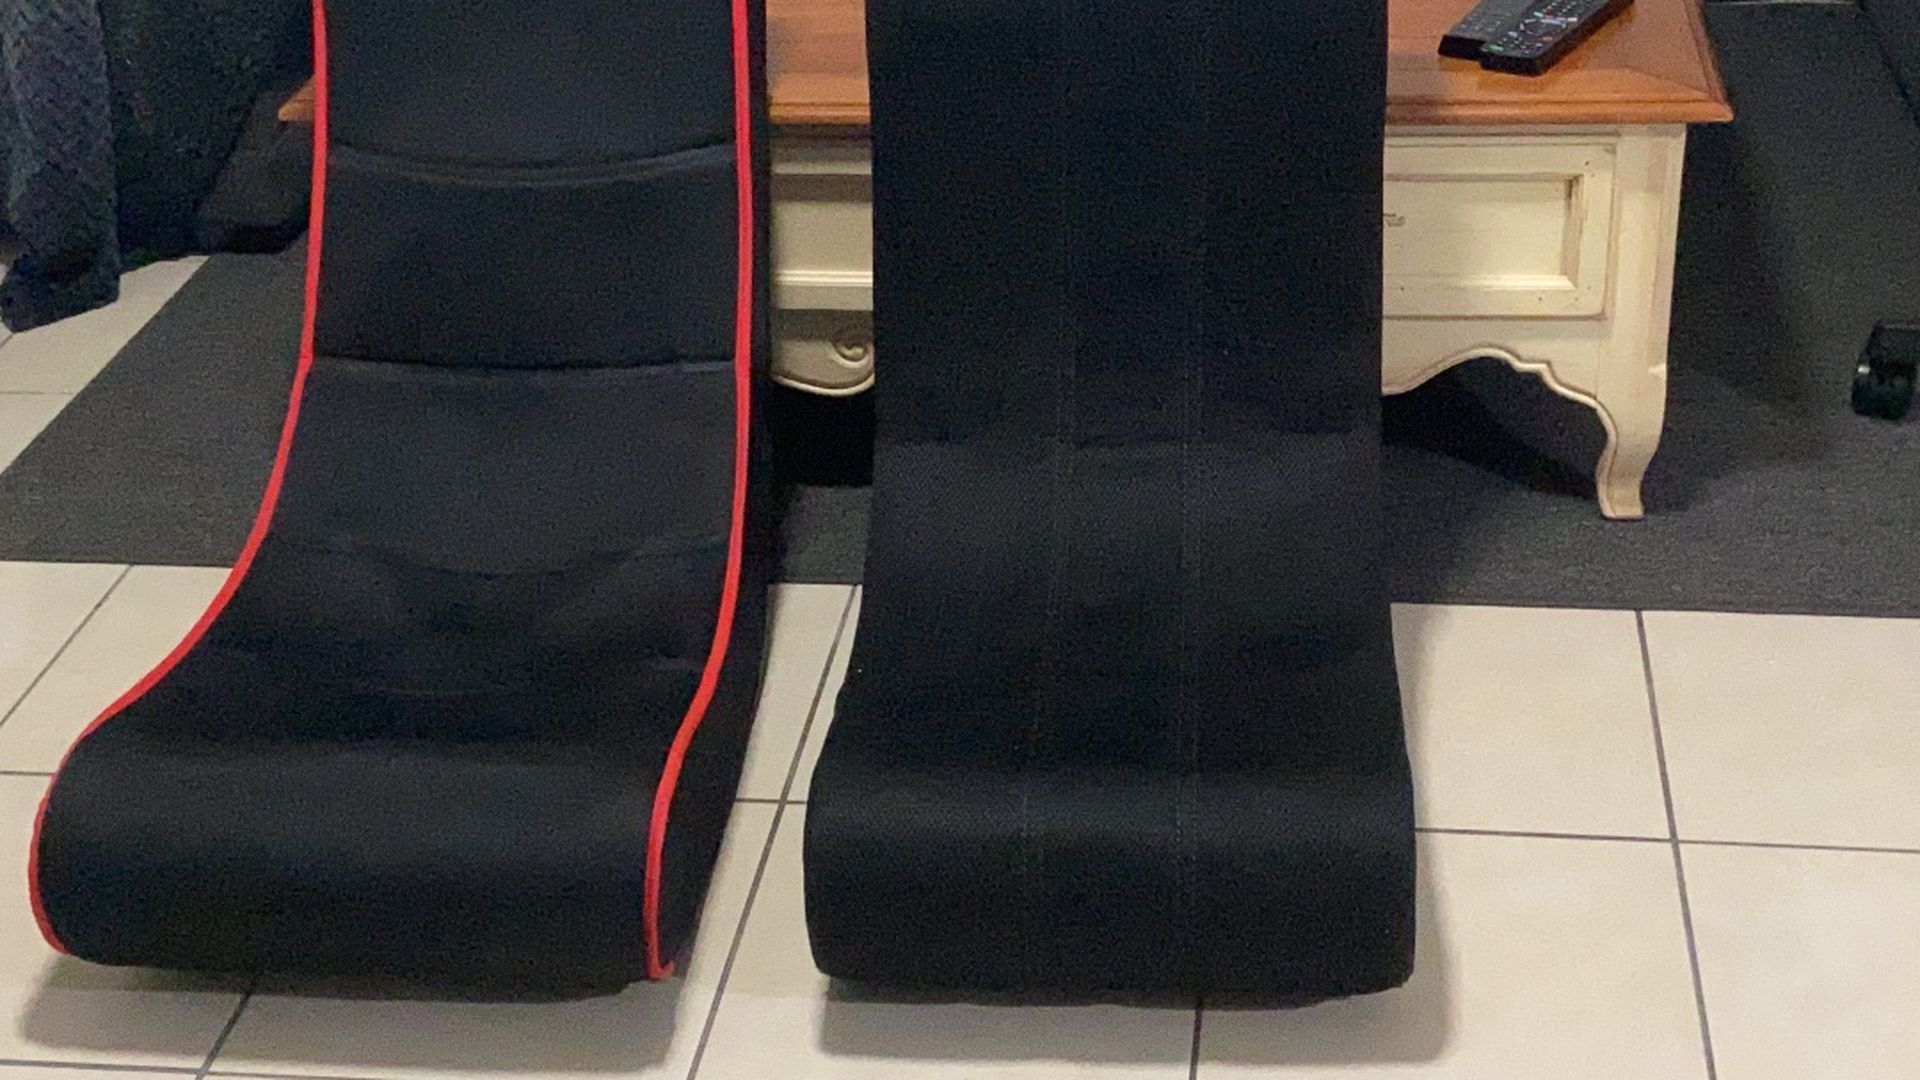 2 Gaming Chairs for &20 OBO (without Charger And Cables)